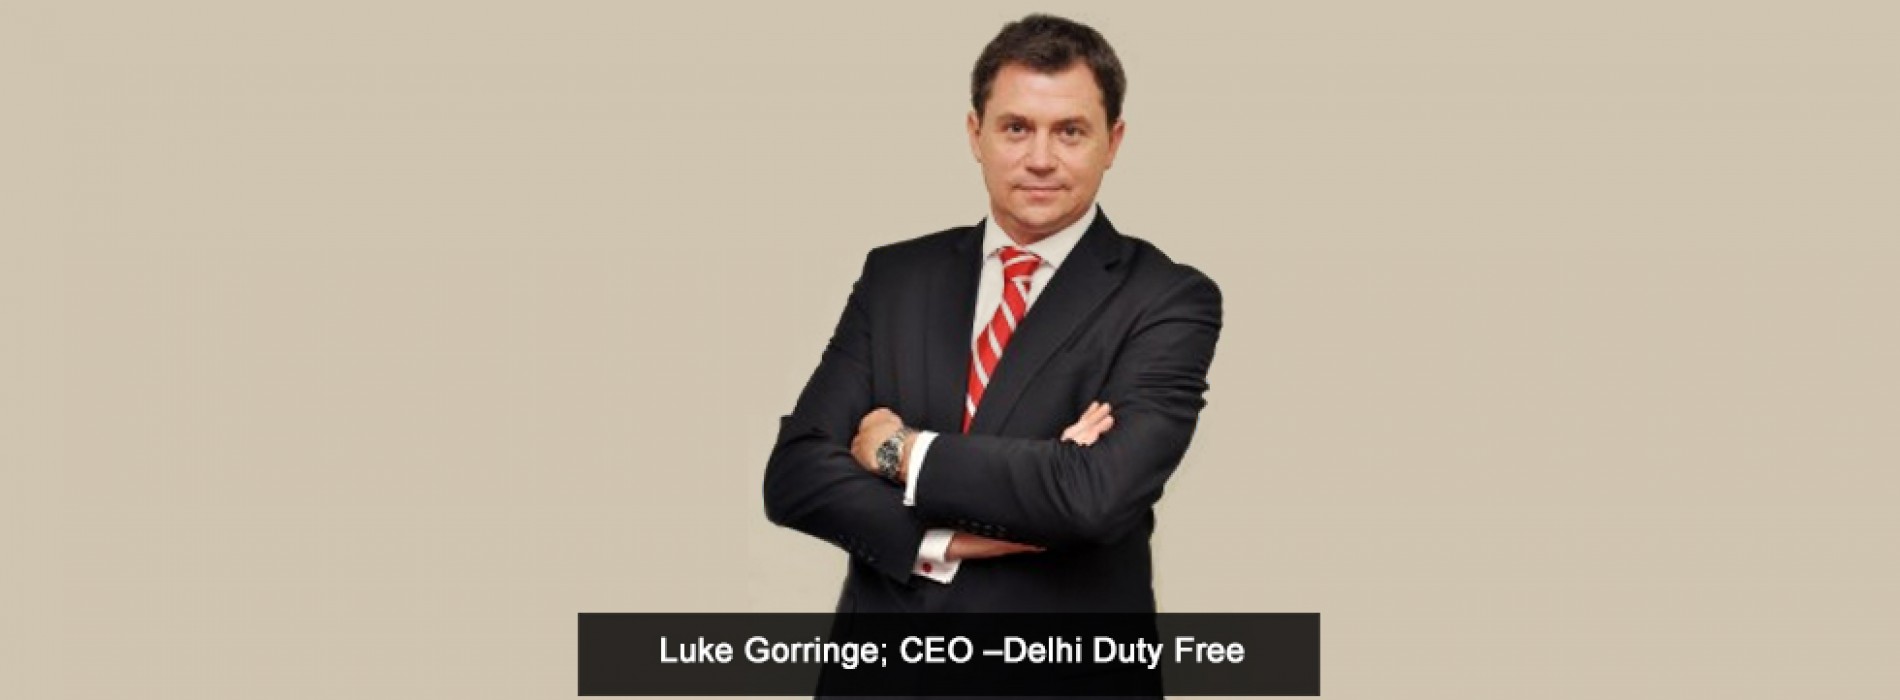 Delhi Duty Free Leads the way to Home Currency Pricing – First among all Travel Retailers in India